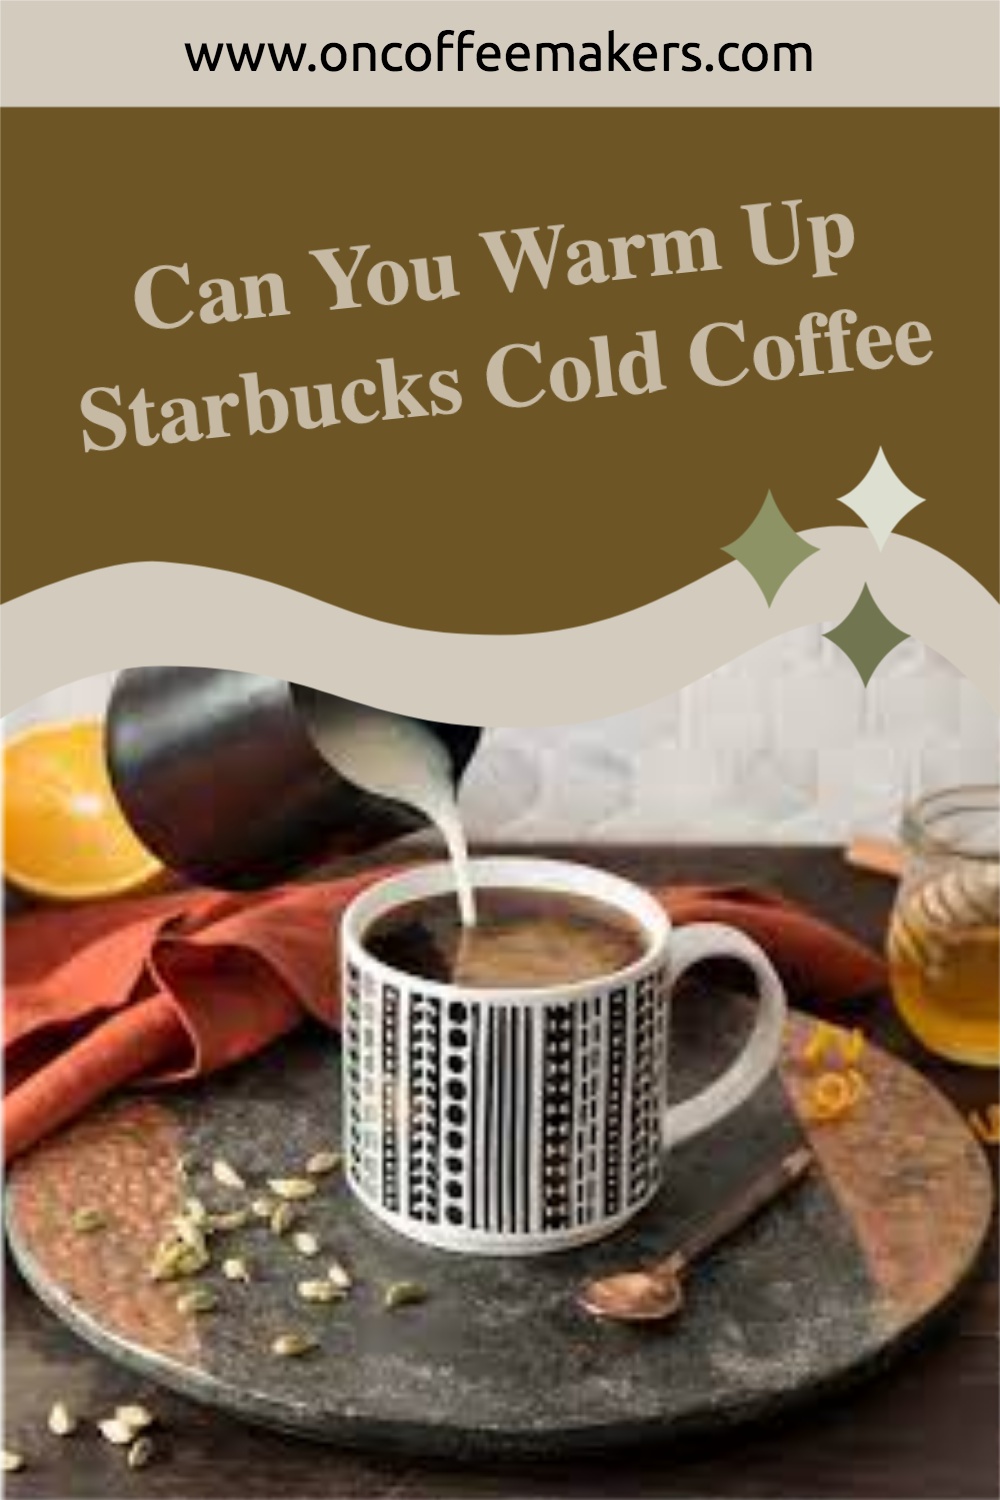 https://www.oncoffeemakers.com/images/Can-You-Warm-Up-Starbucks-Cold-Coffee.jpg